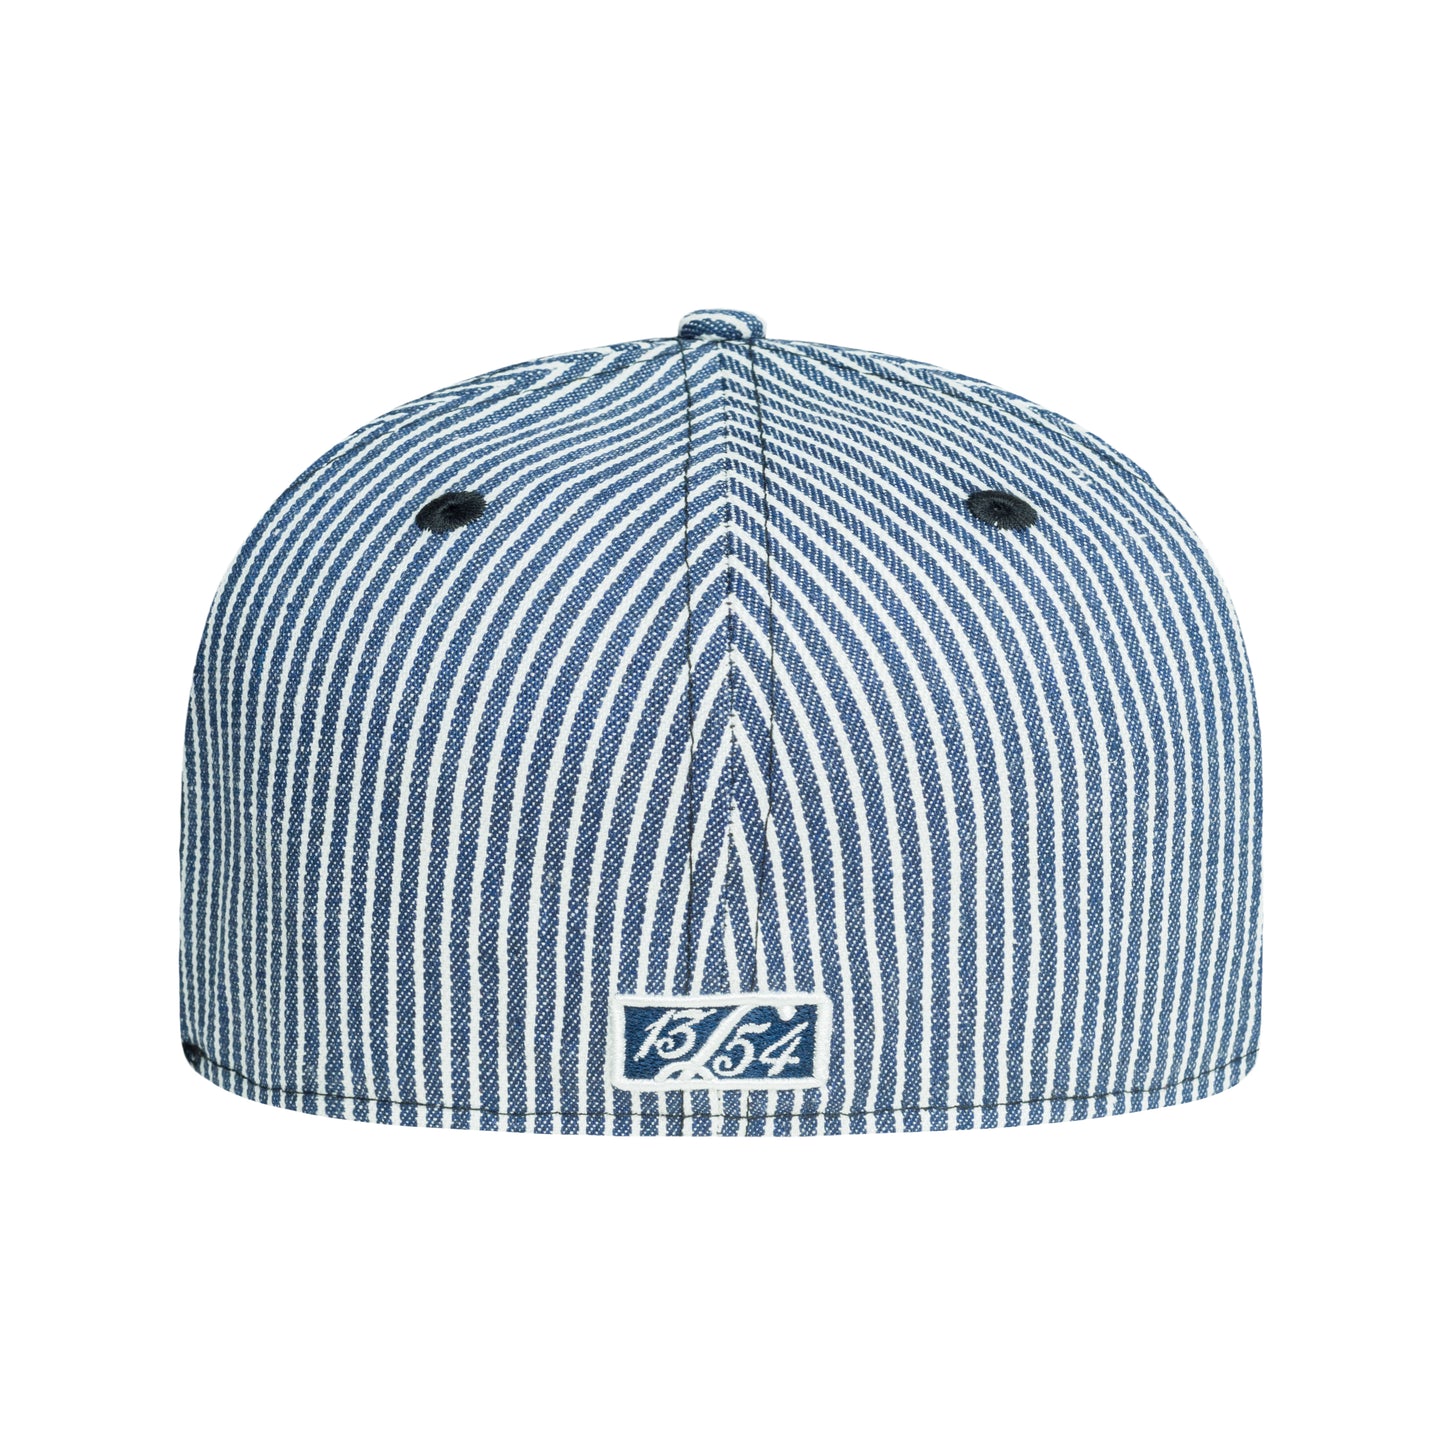 Leaders "Conductor" Hat Navy/White